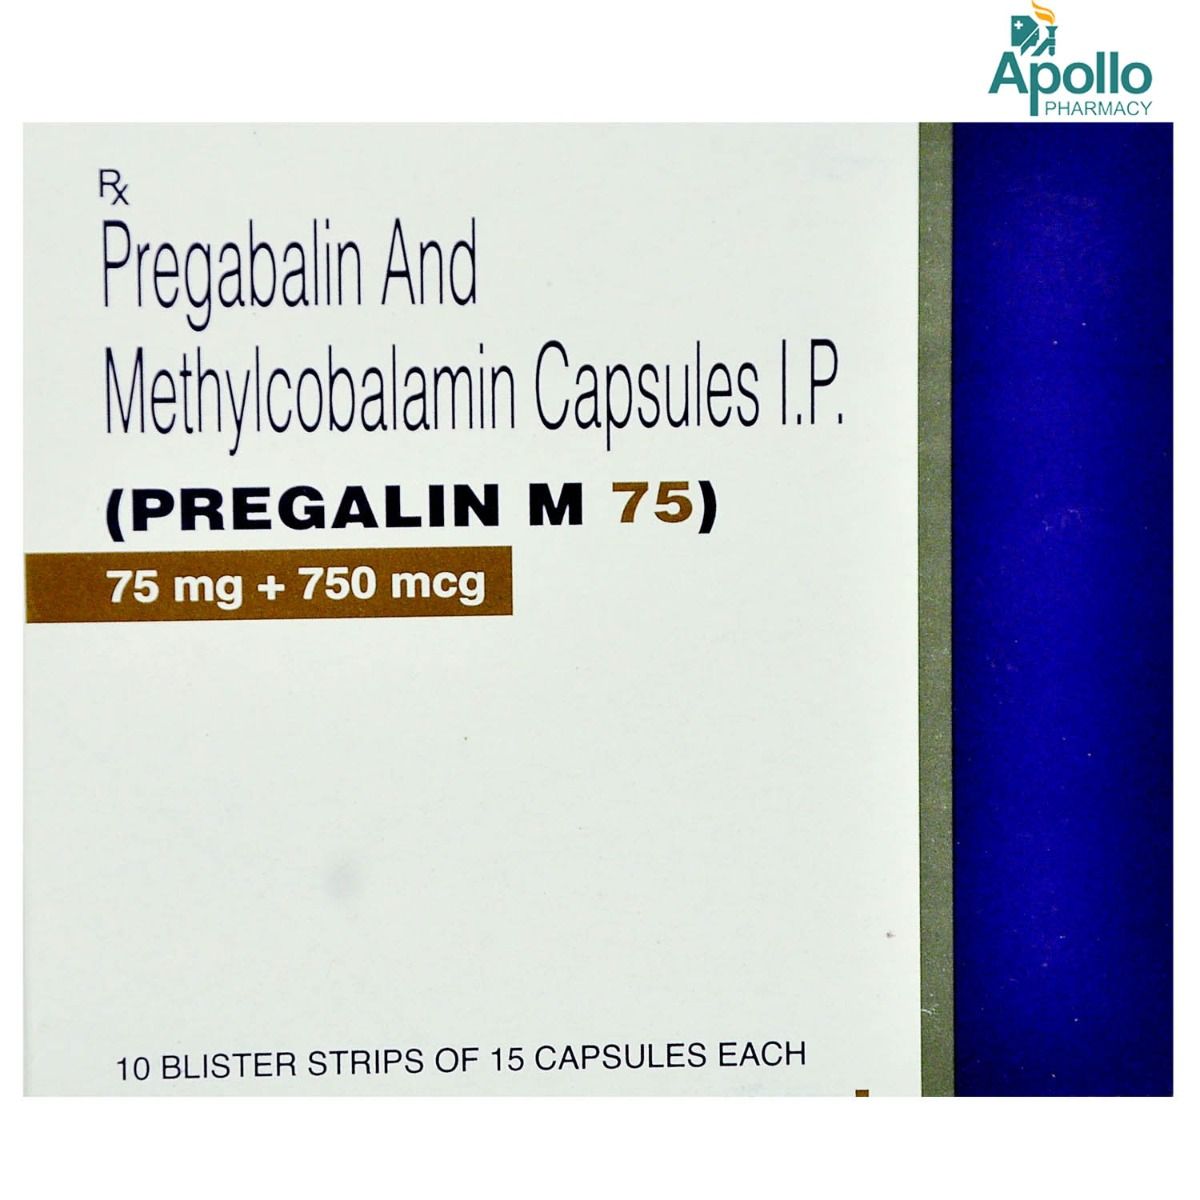 Pregalin M 75 Capsule 15's Price, Uses, Side Effects, Composition ...